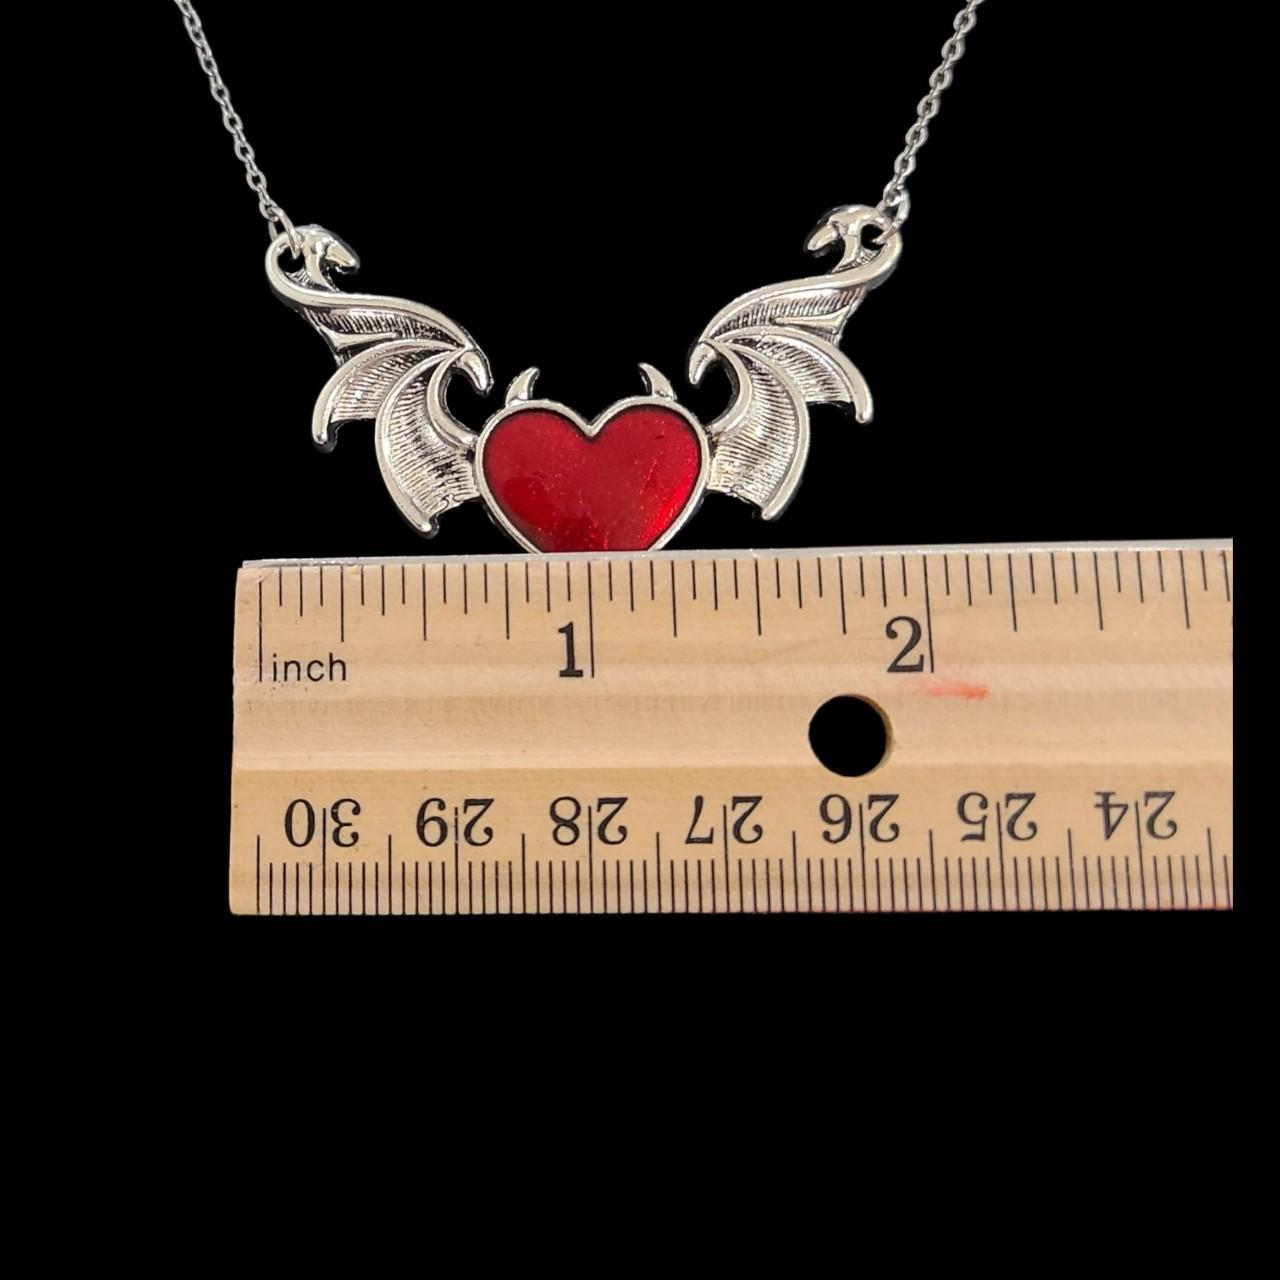 Product Image 3 - Red Batwing Heart Necklace
...
Red Enamel